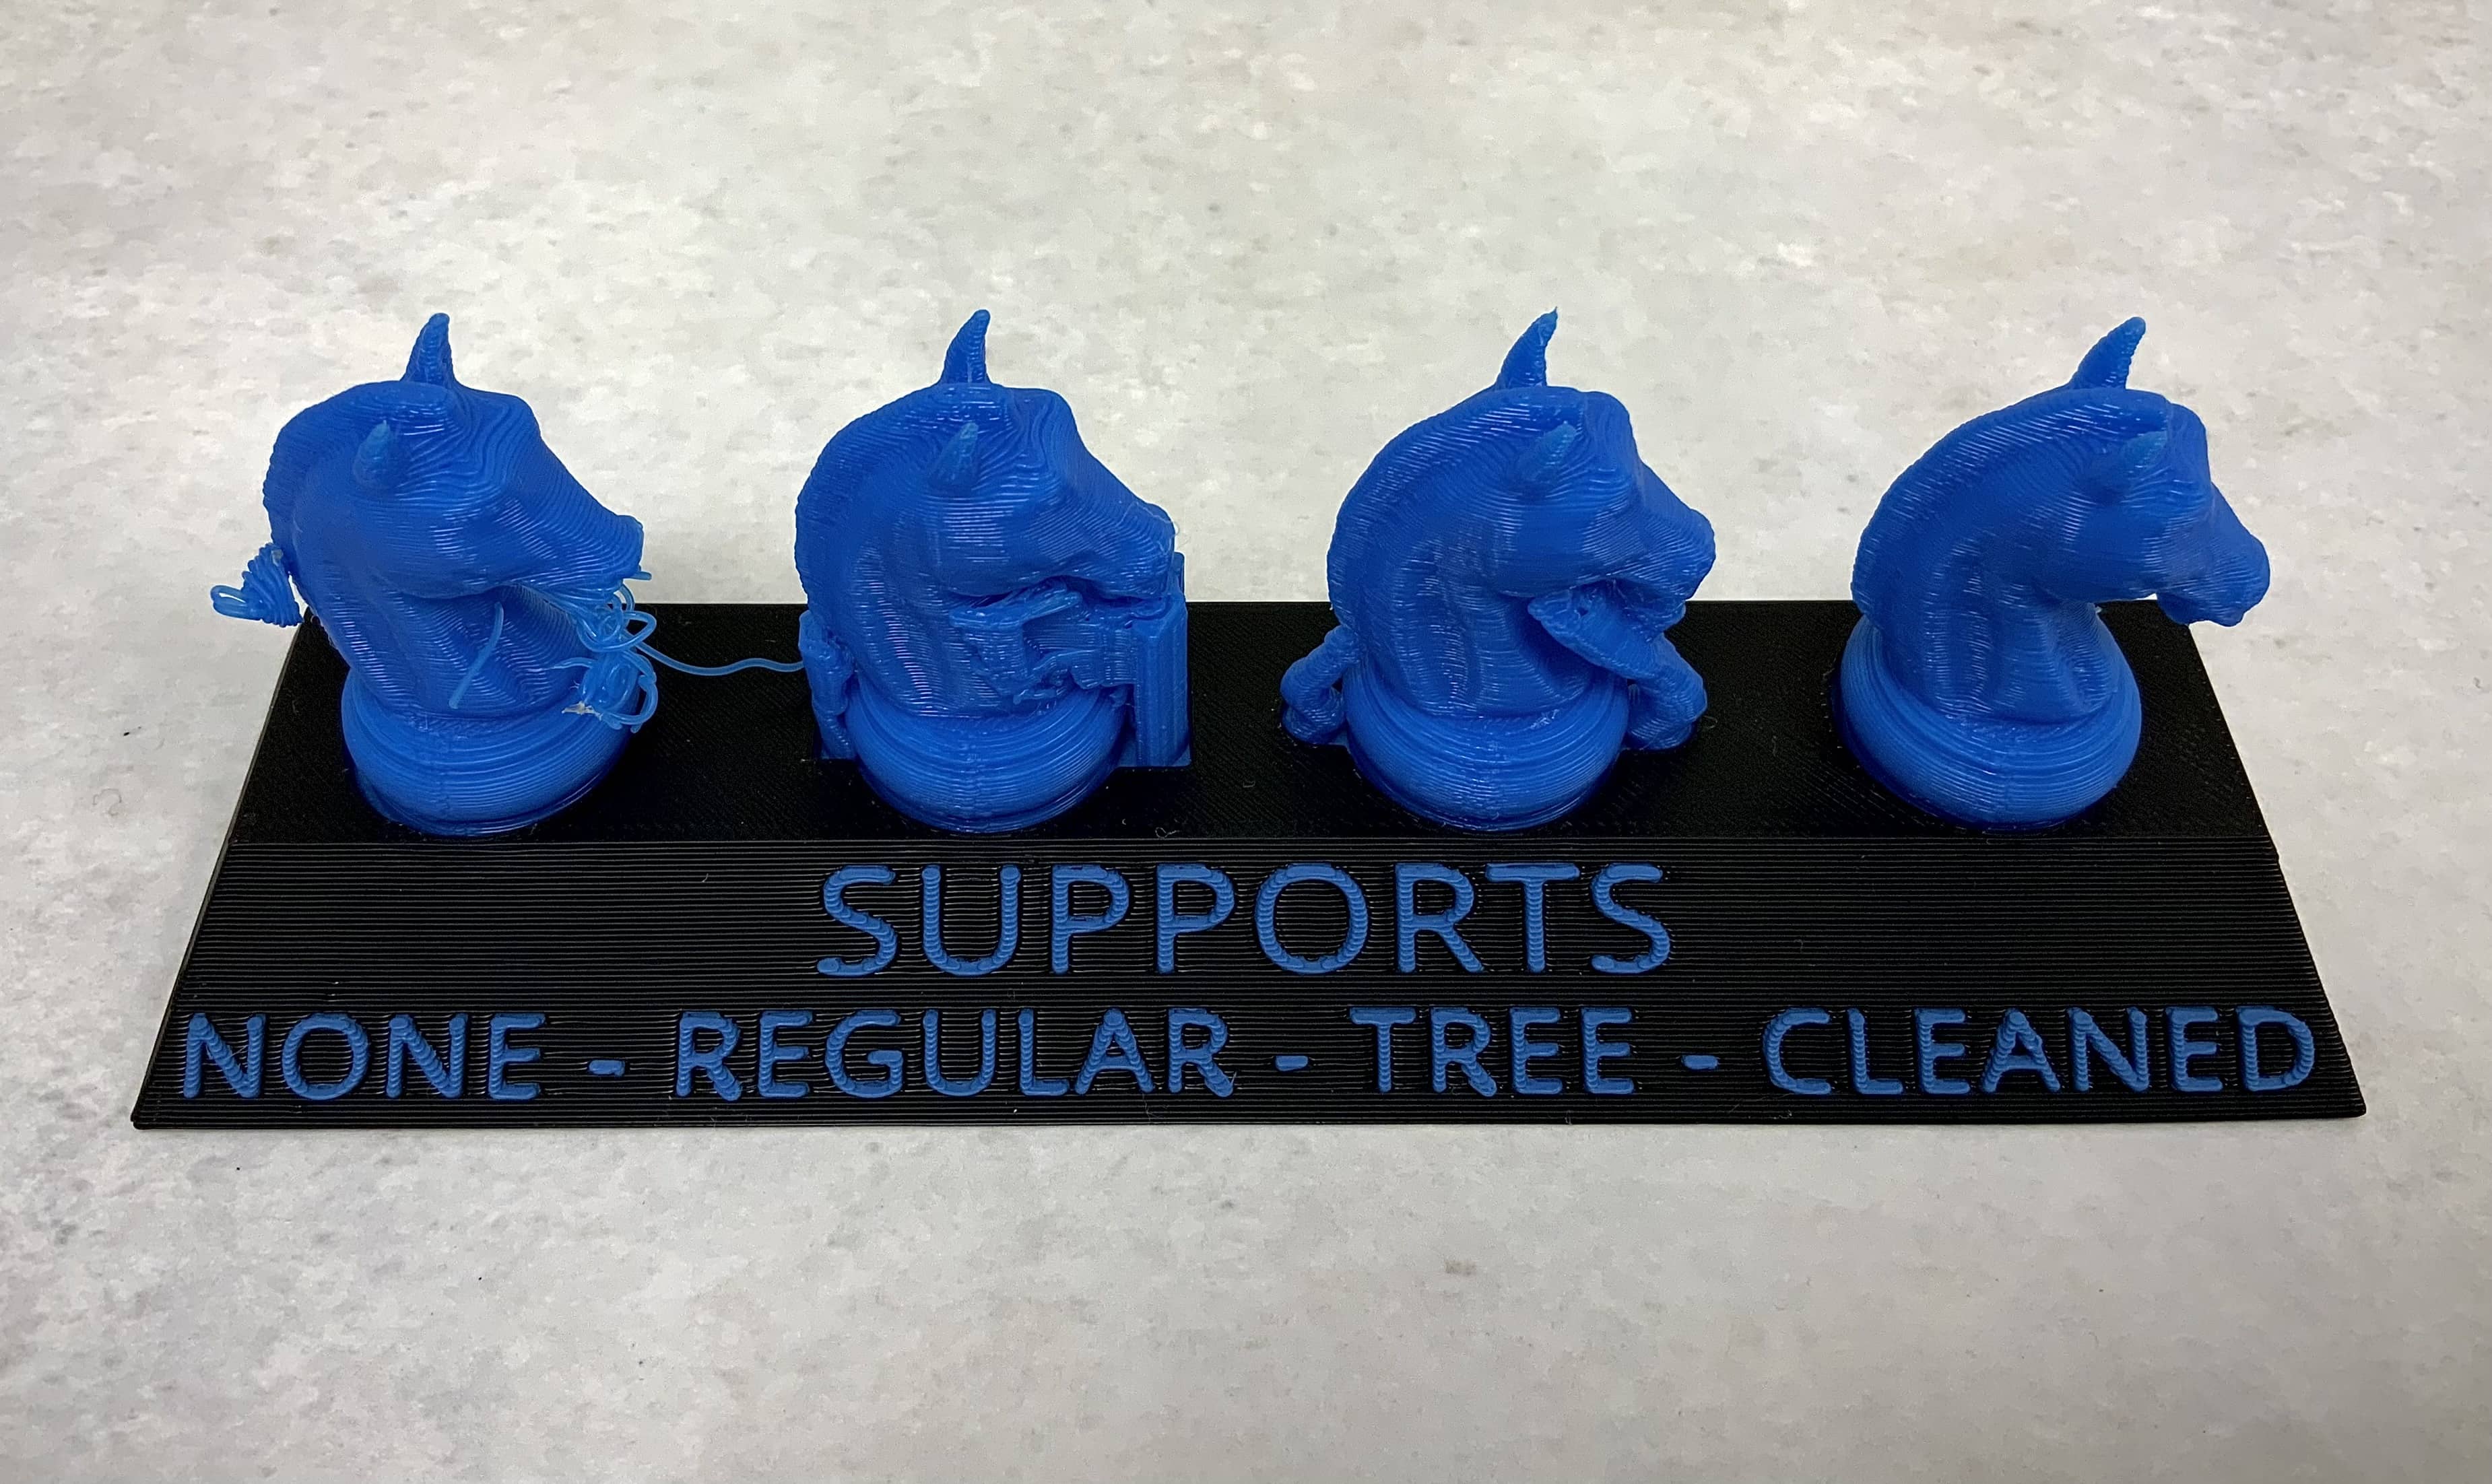 Four blue 3D printed chess set knights side by side on a black plinth with blue text which reads "Supports" and the words unsupported, regular, tree, and cleaned under each knight. The left knight has a snout akin to unraveled yarn, the regular knight has blue blocks under its snout and mane, the tree knight has thick blue branches supporting the snout and mane, while the cleaned knight shows a completed chess piece without issues.